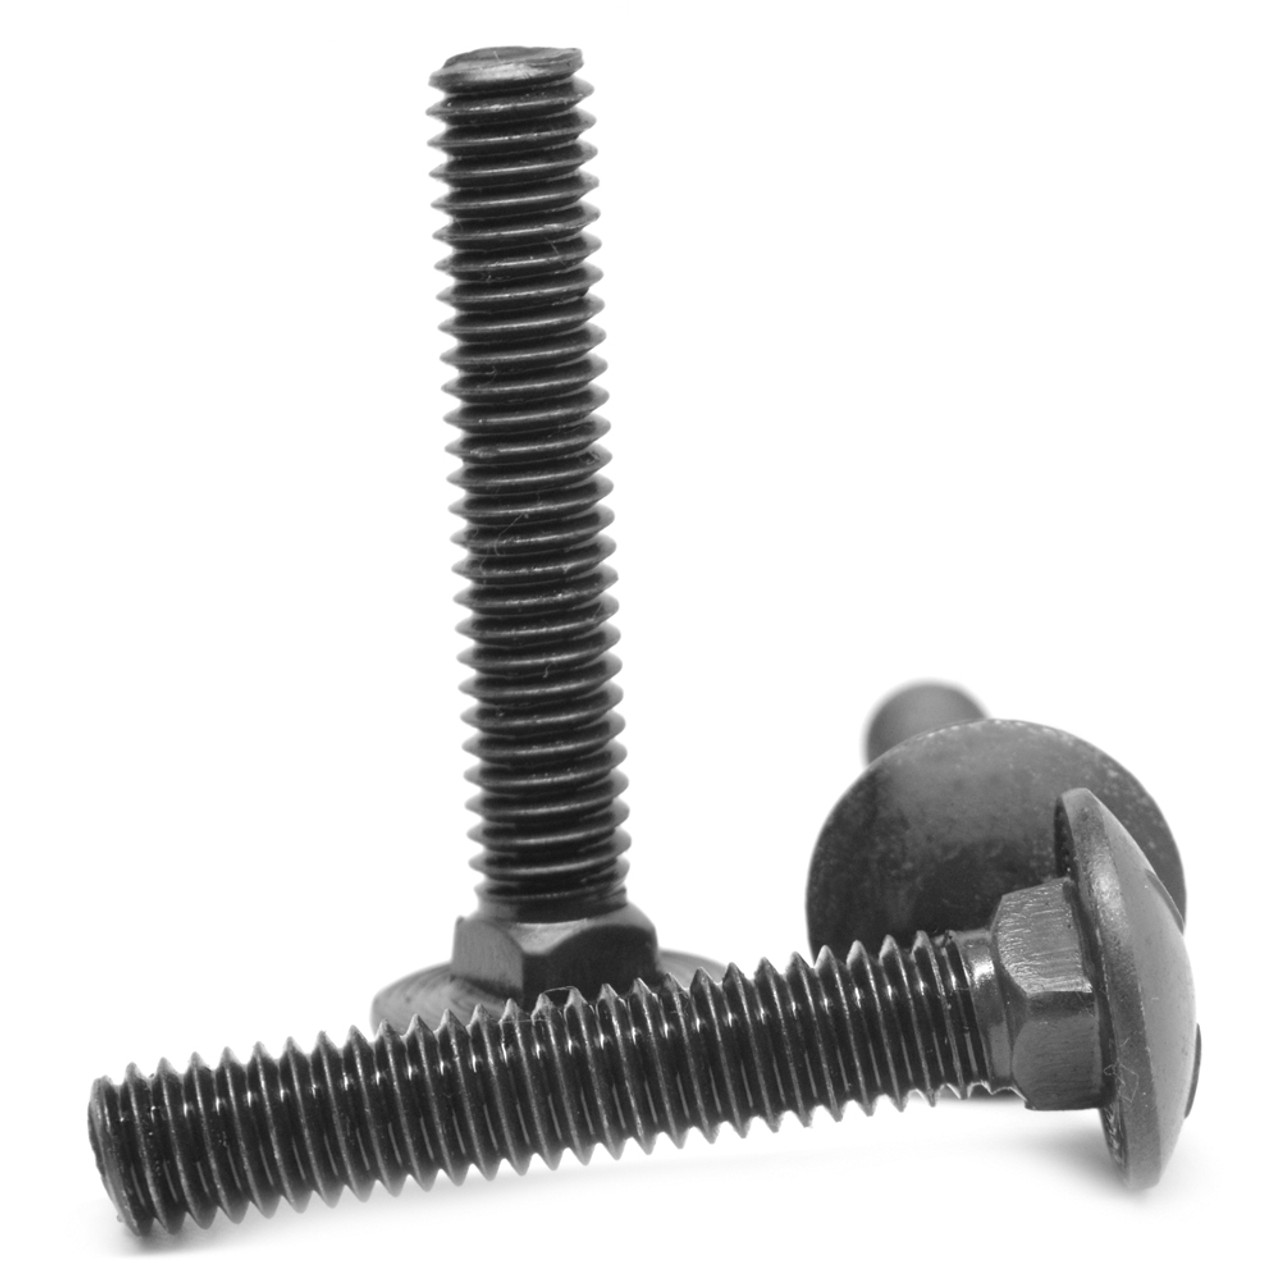 1/2-13 x 4 1/2 (FT) Coarse Thread Grade 8 Carriage Bolt Alloy Steel Thermal Black Oxide